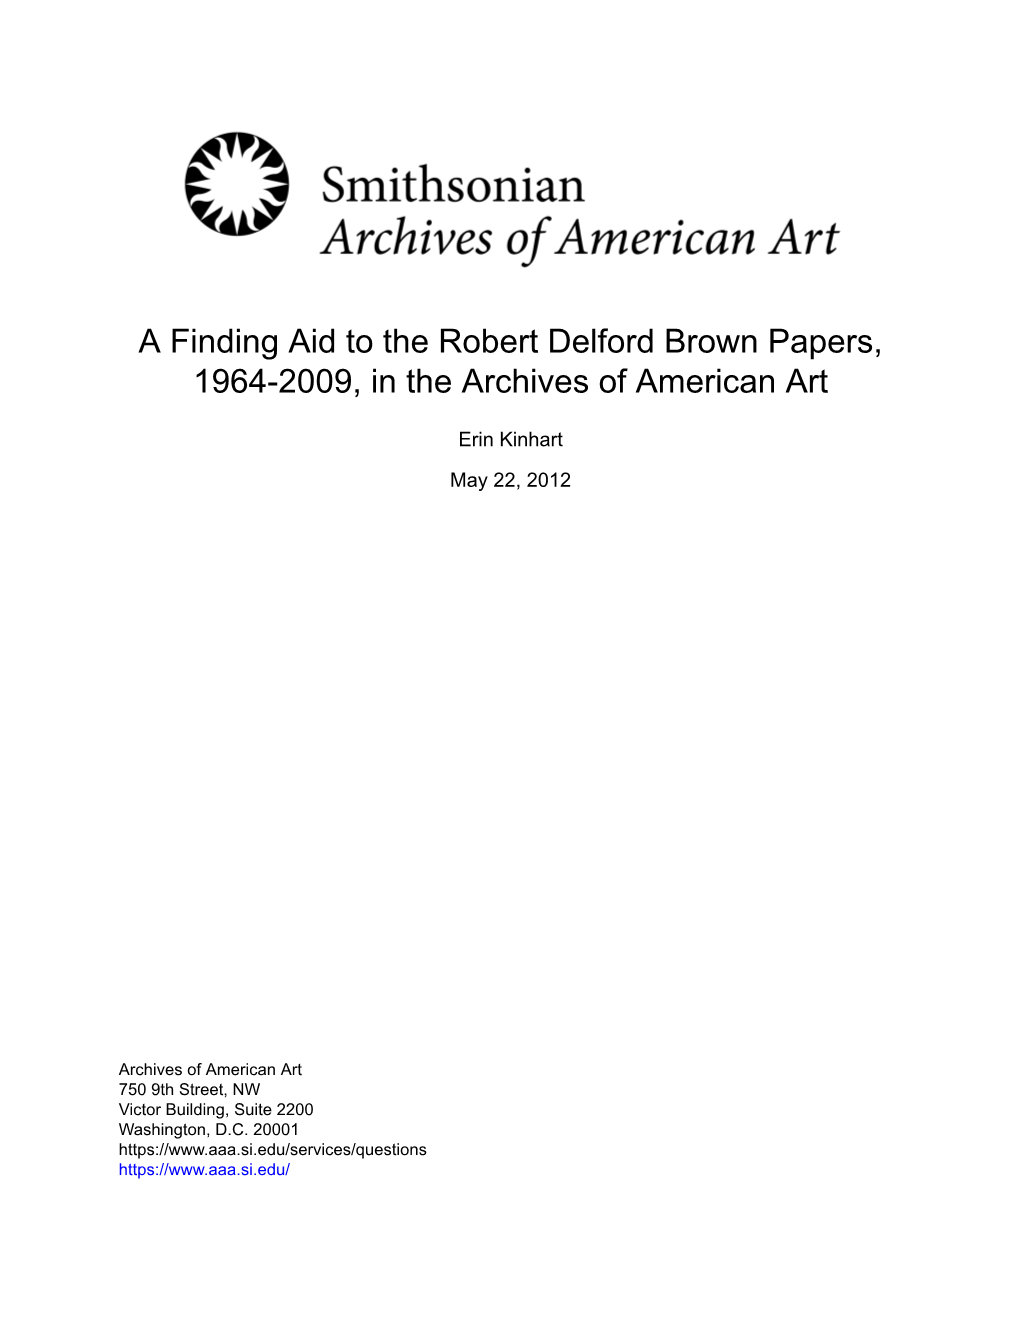 A Finding Aid to the Robert Delford Brown Papers, 1964-2009, in the Archives of American Art